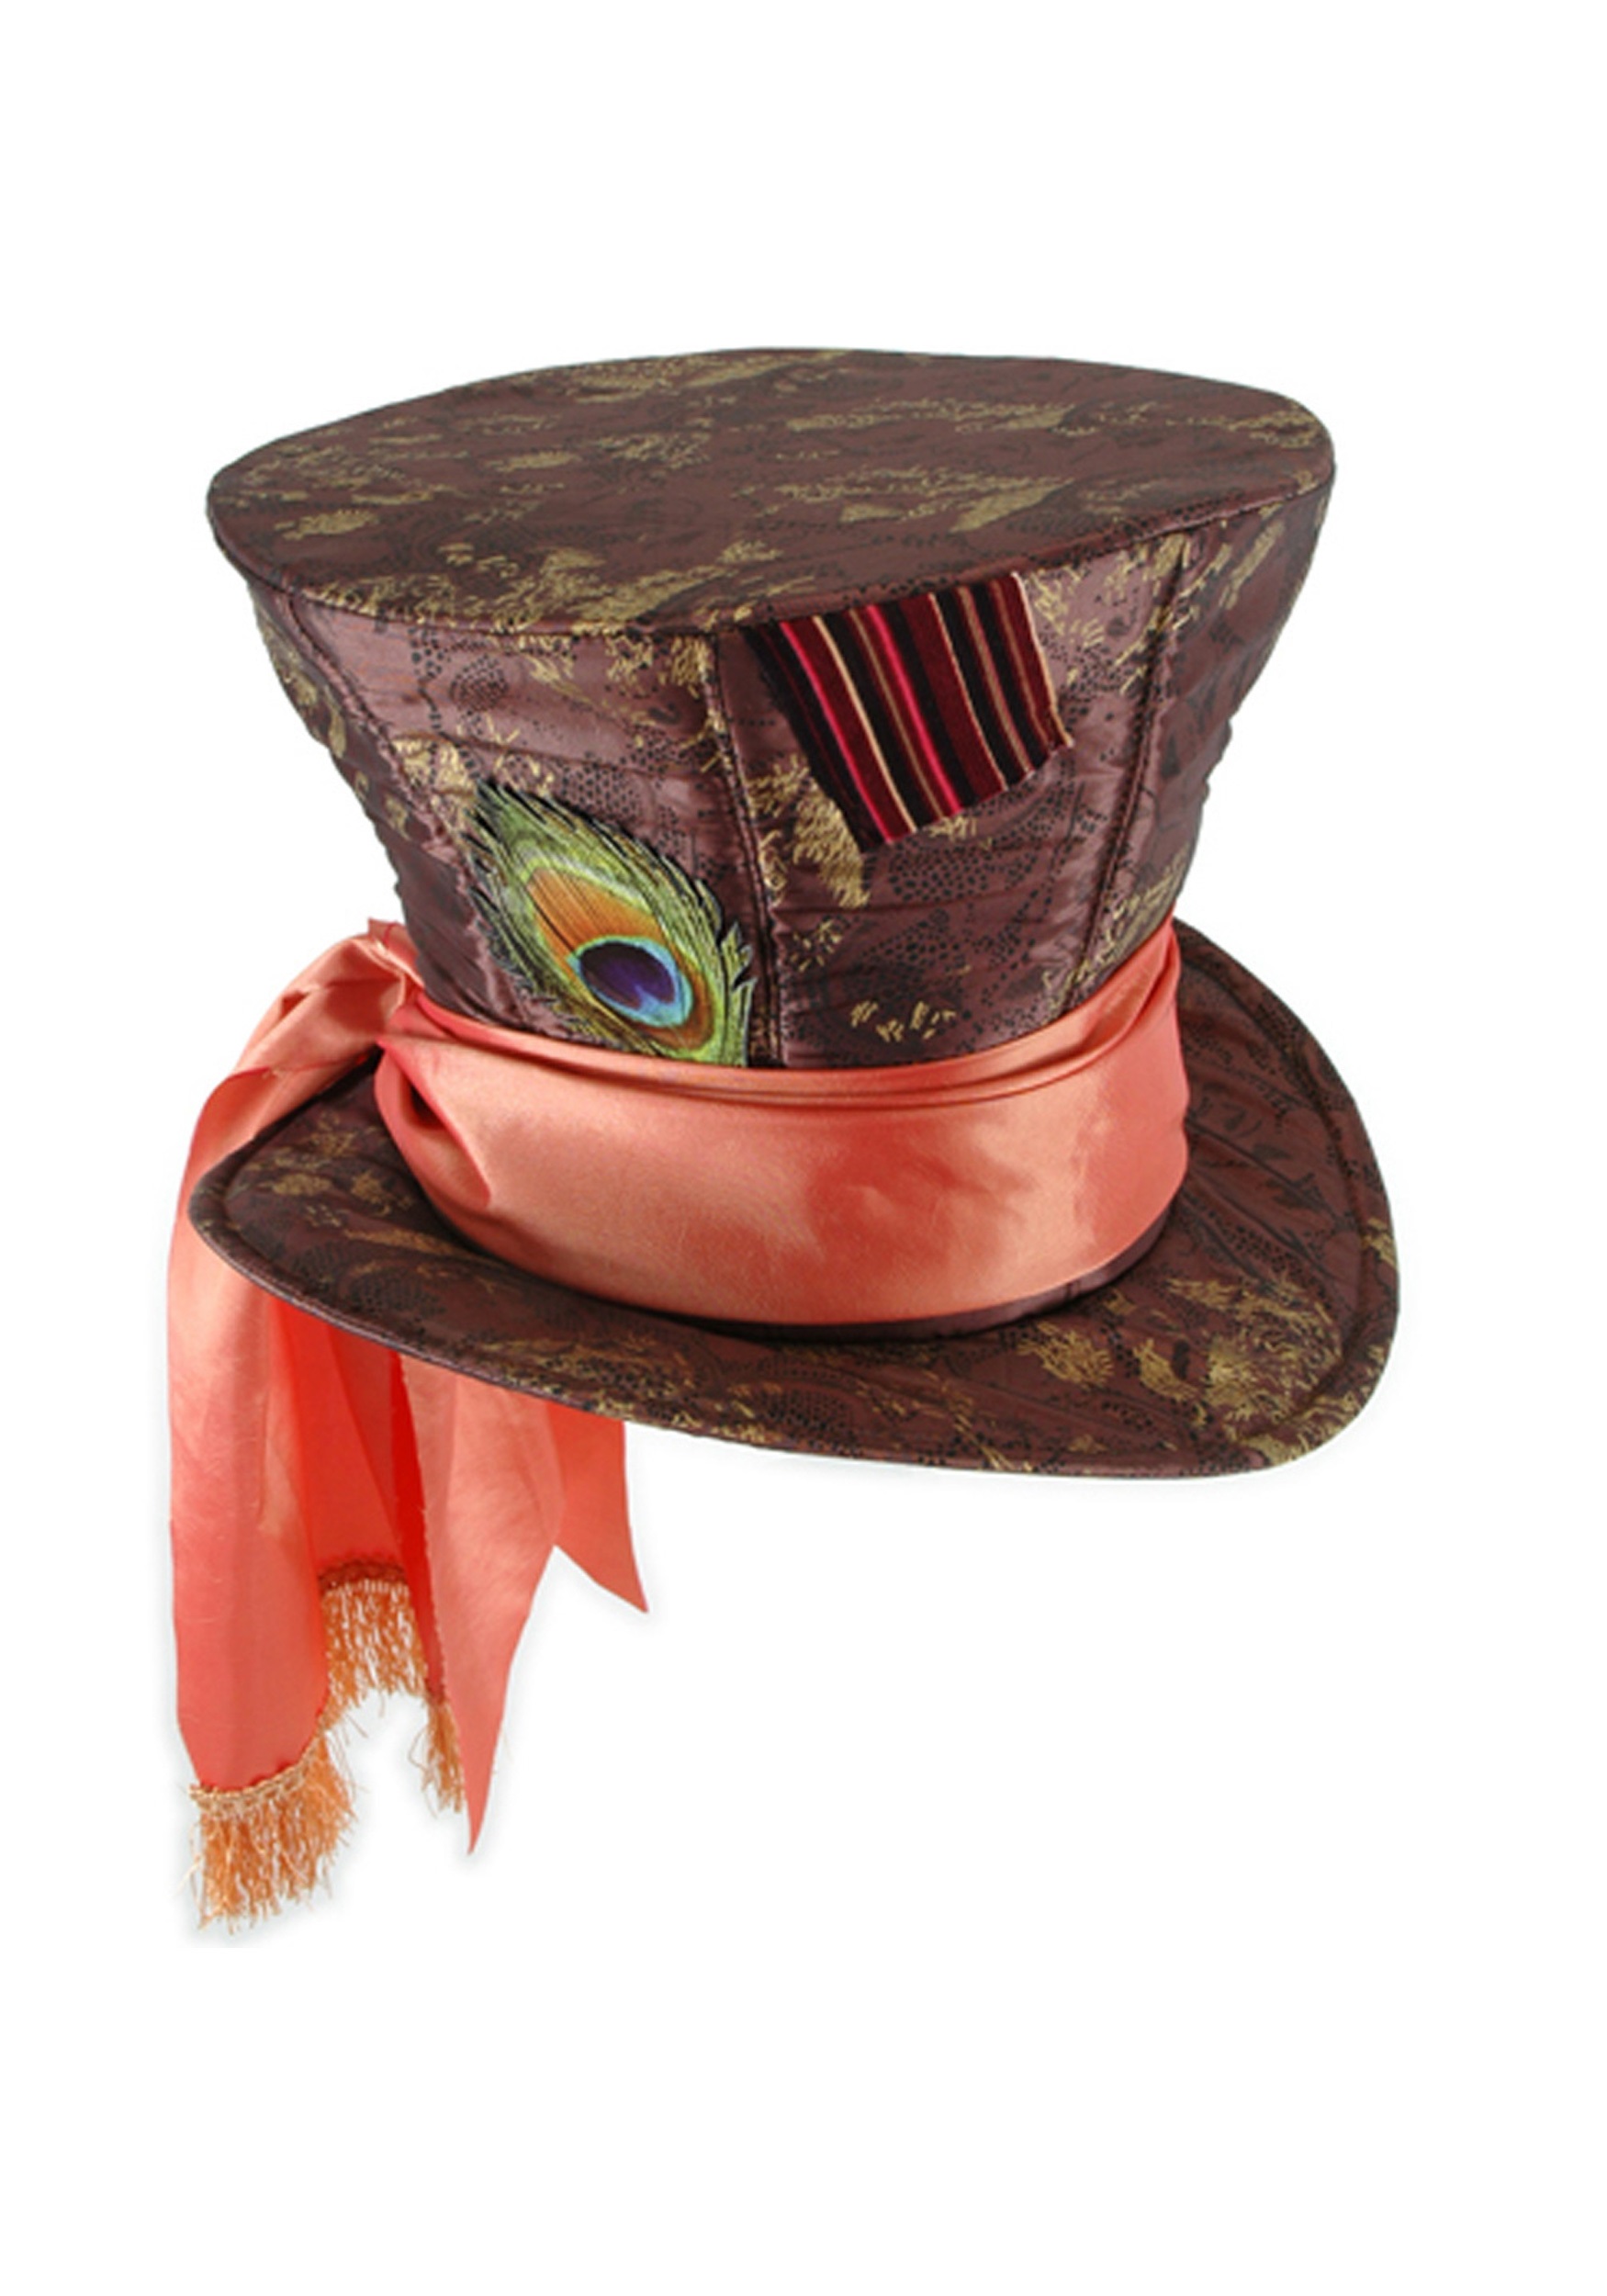 mad hatters top hat